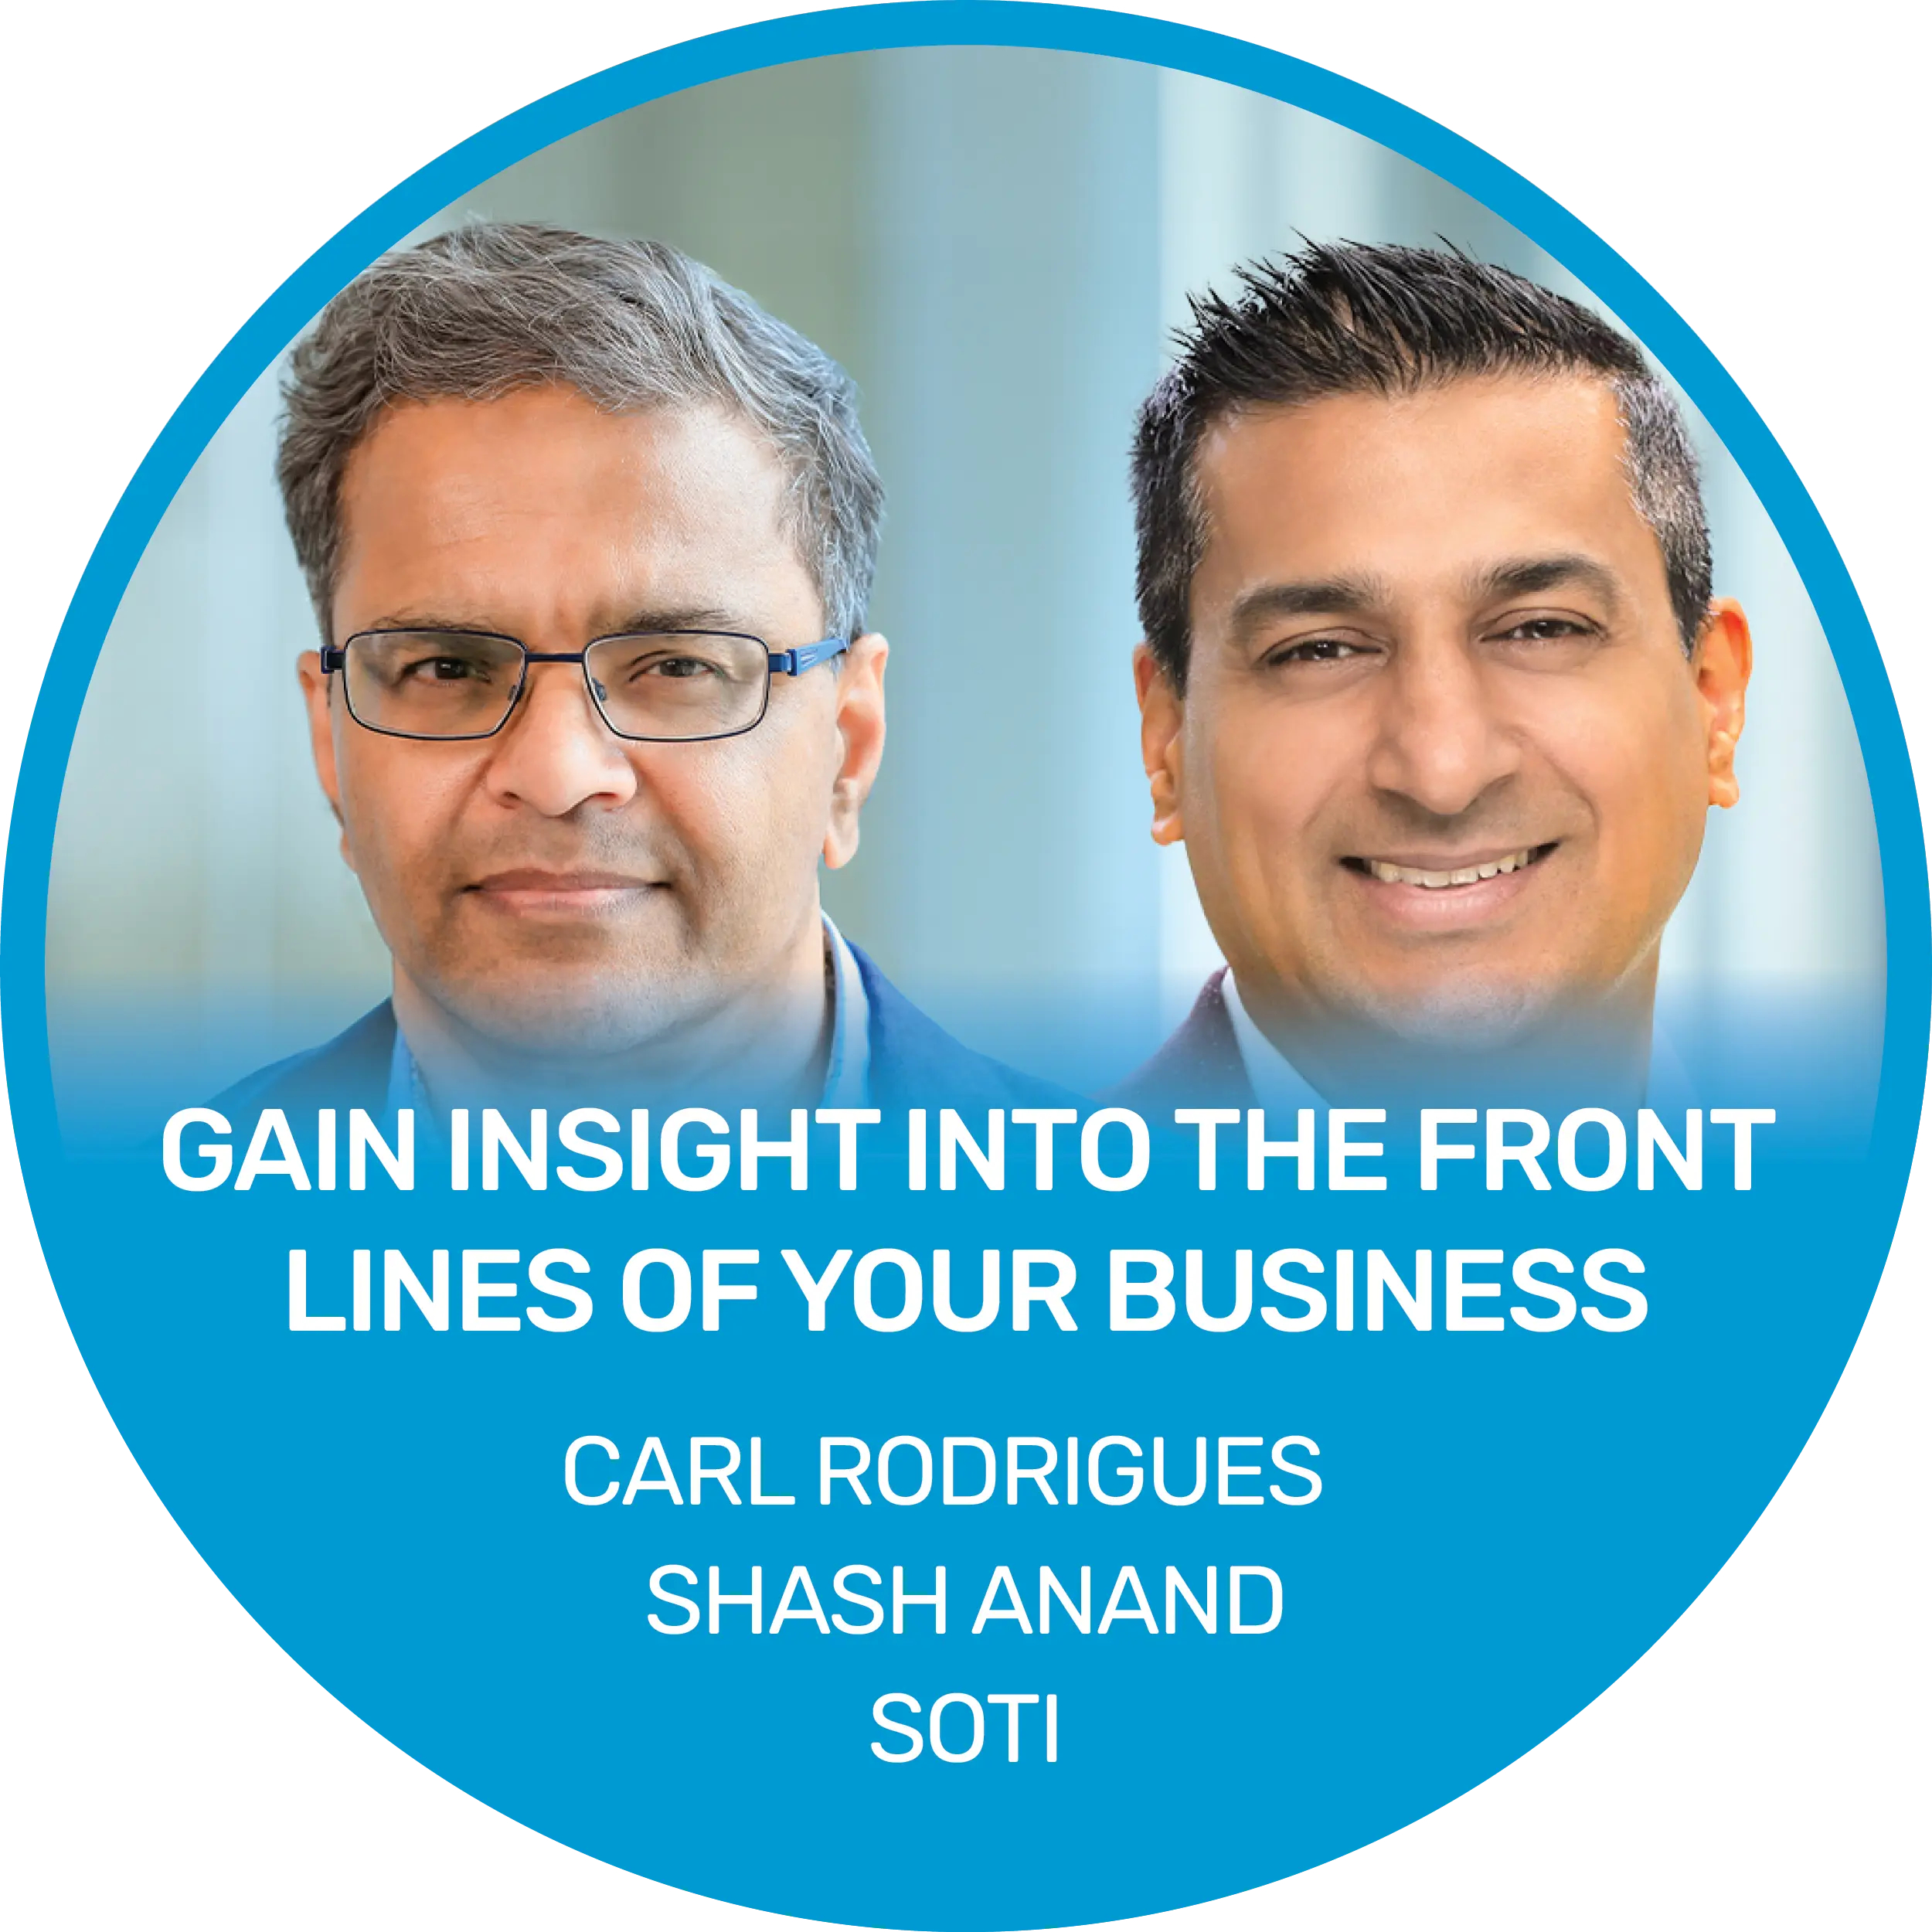 Gain insight into the front lines of your business - Carl Rodrigues, President & CEO, SOTI & Shash Anand, SVP, Product Strategy, SOTI